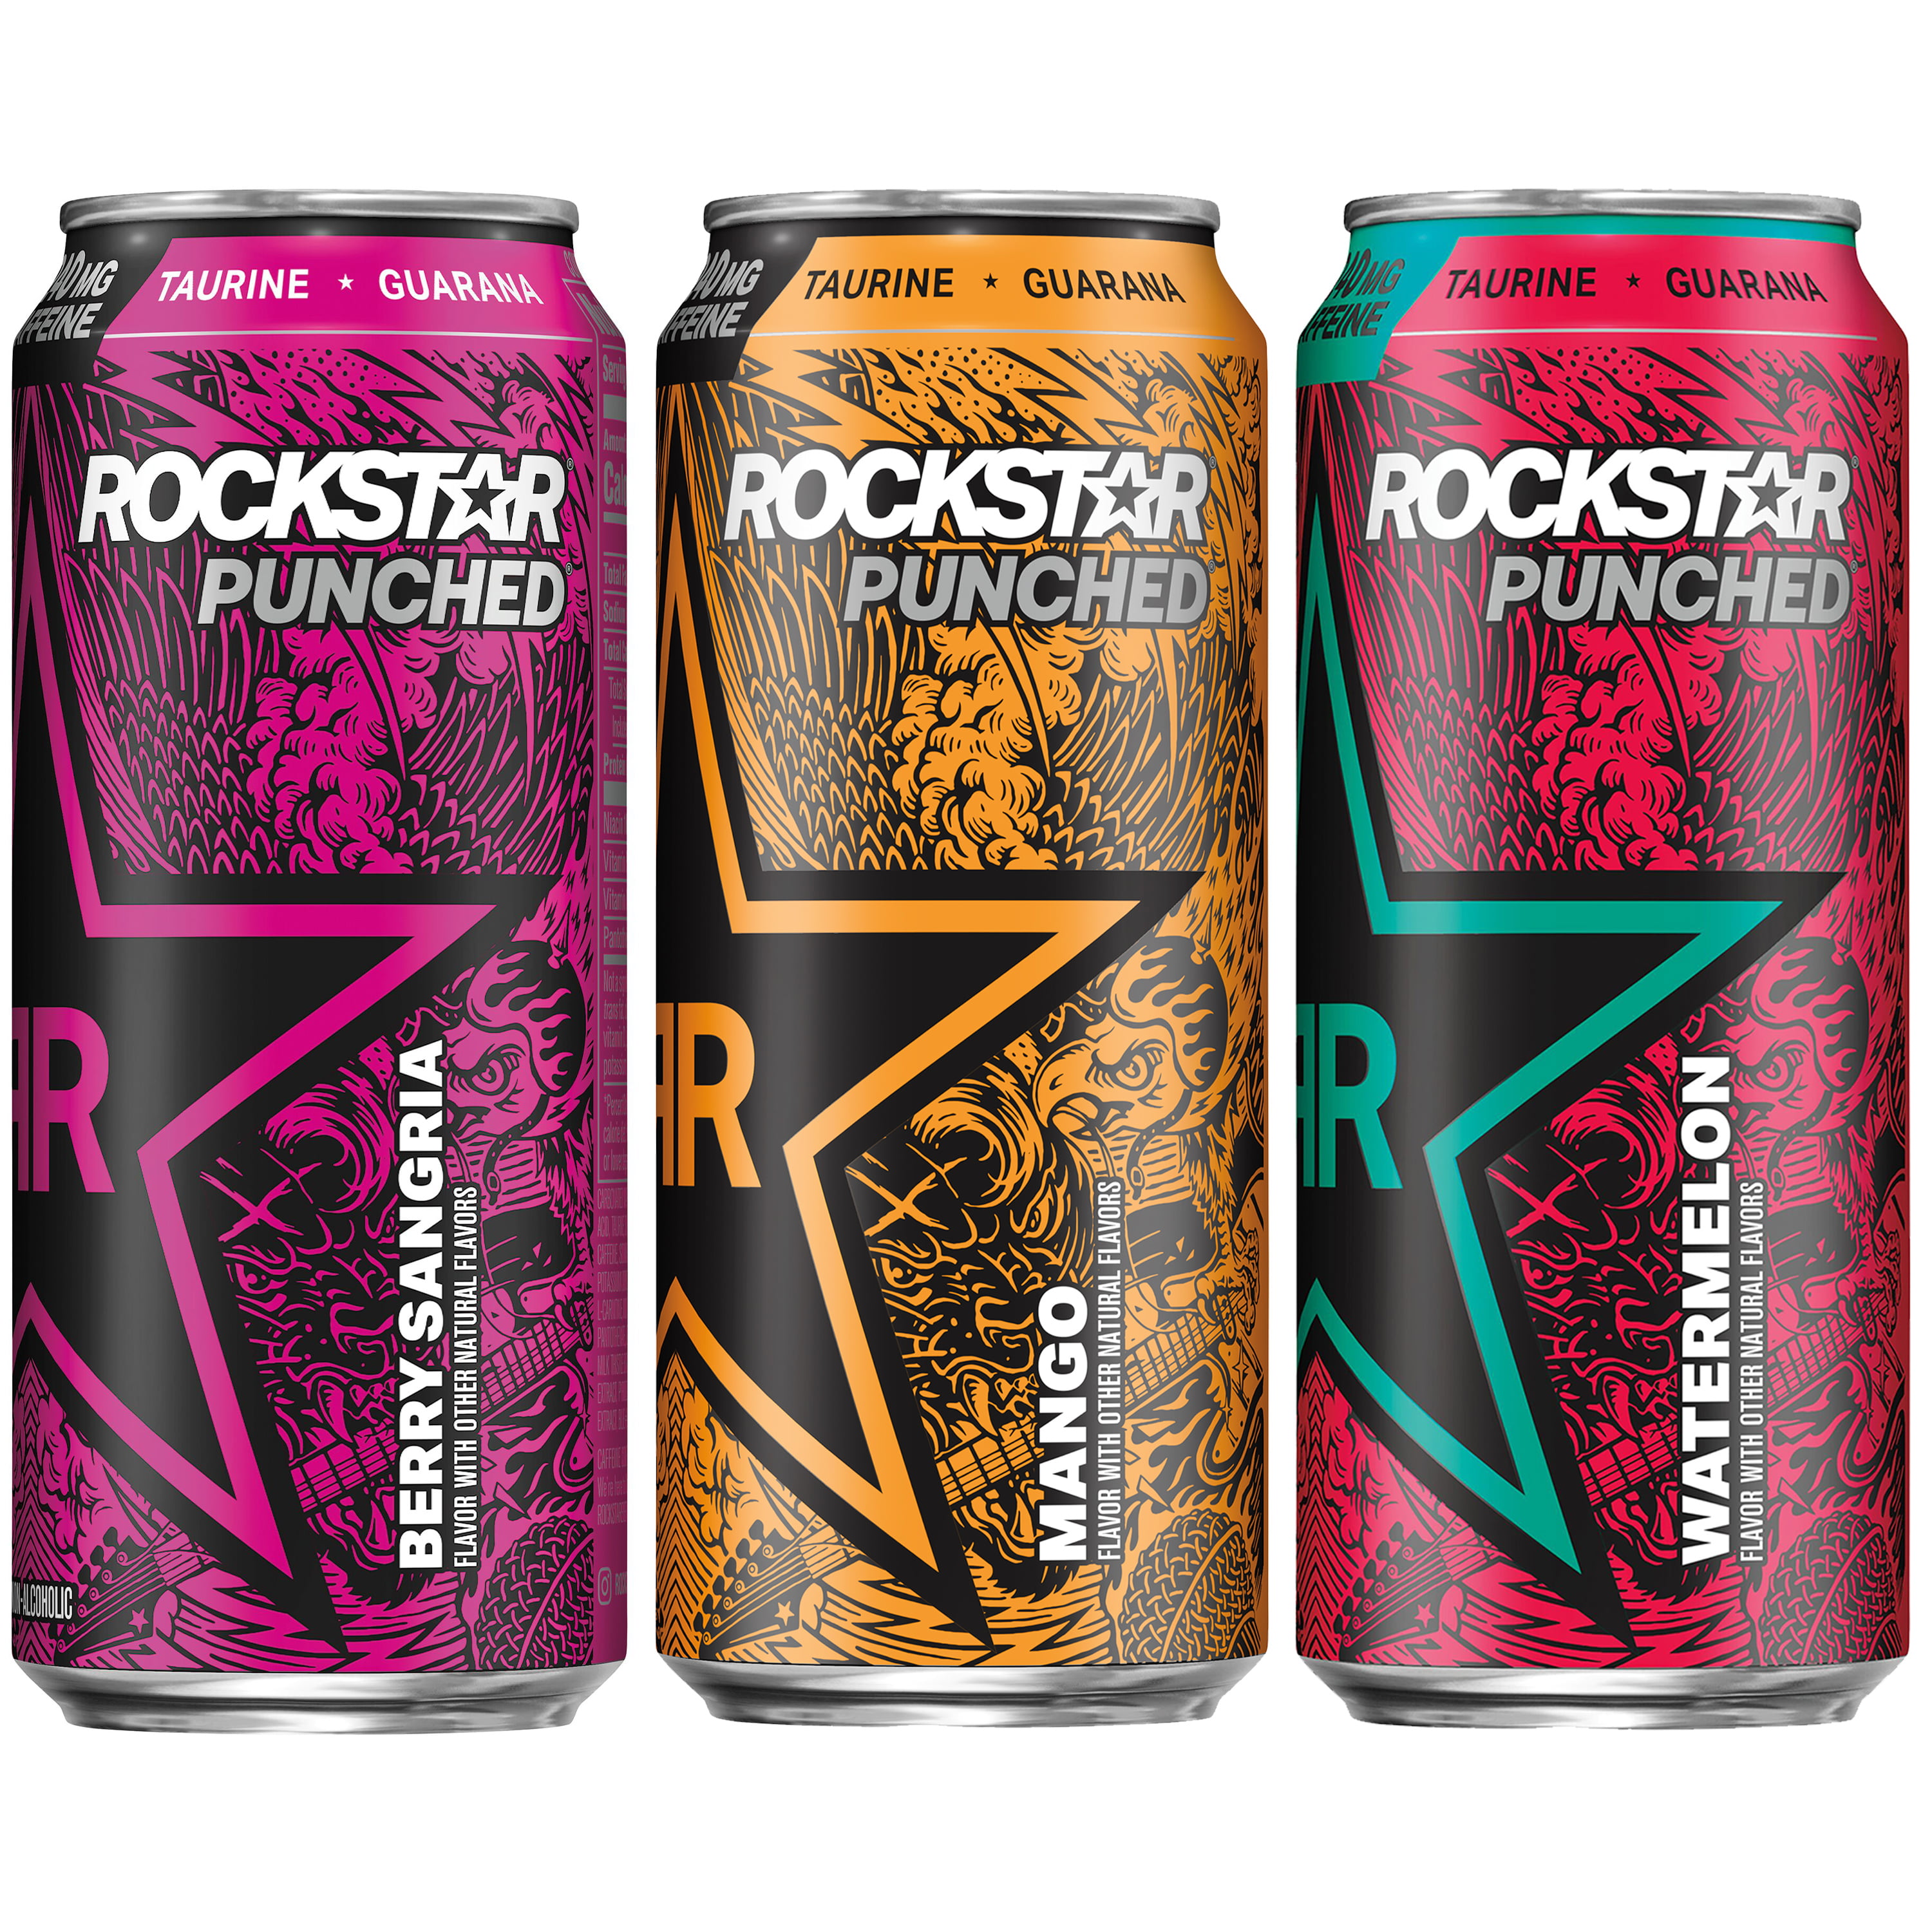 Rockstar Punched 3 Flavor Variety Pack Energy Drink, 16 fl oz, 12 Cans ...